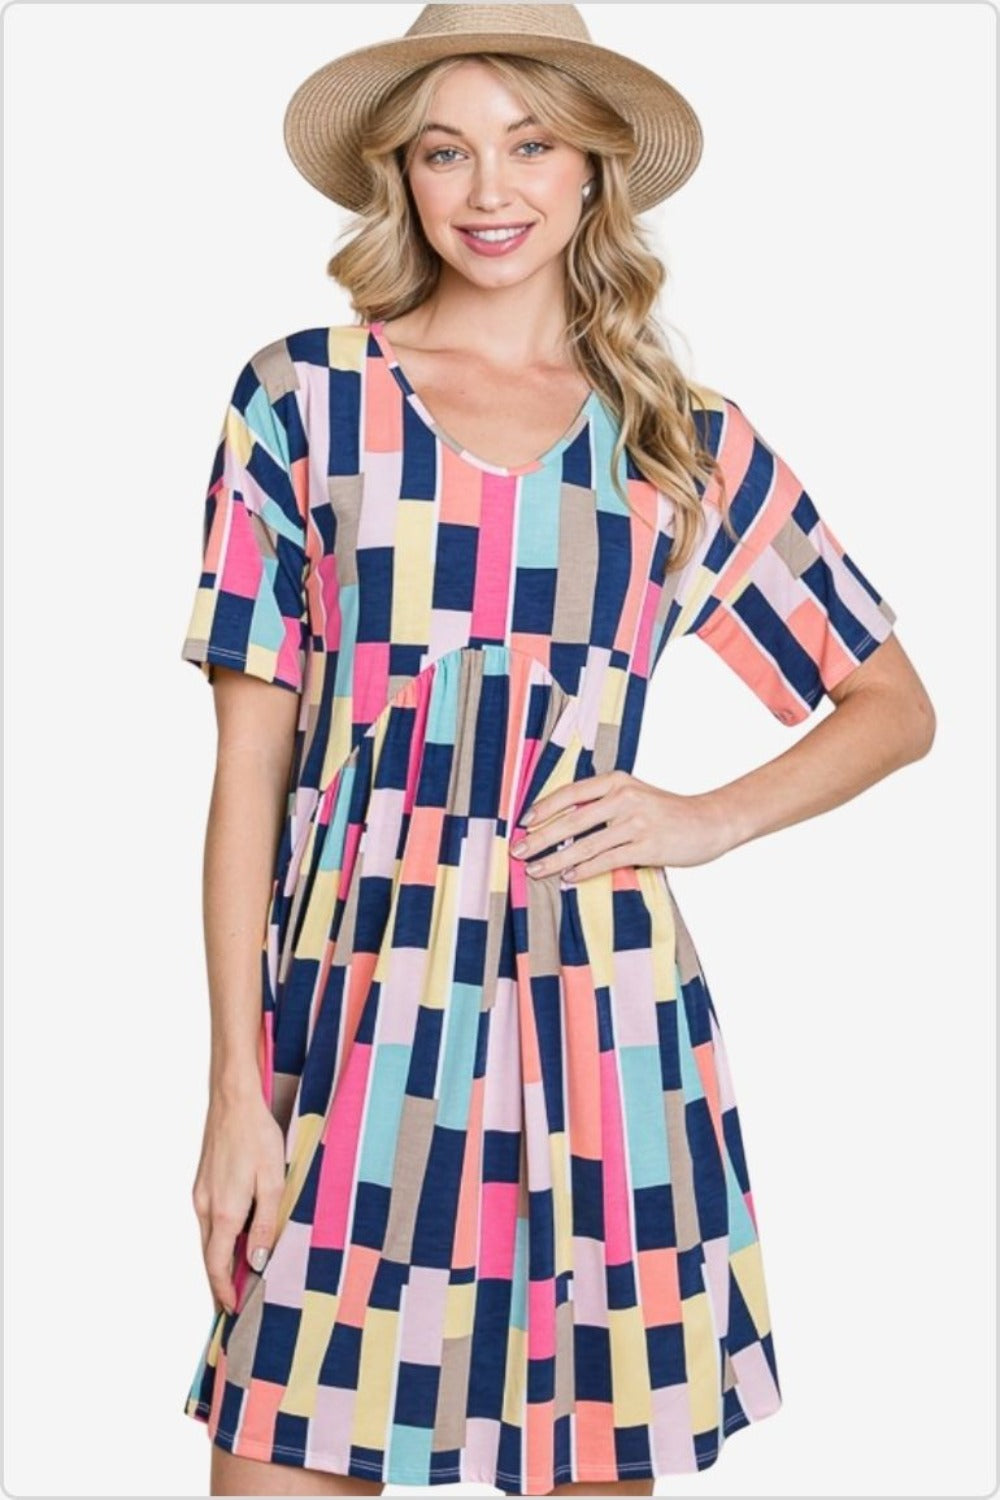 Woman in a straw hat smiling in a colorful geometric print dress with short sleeves, perfect for a playful and chic summer look.